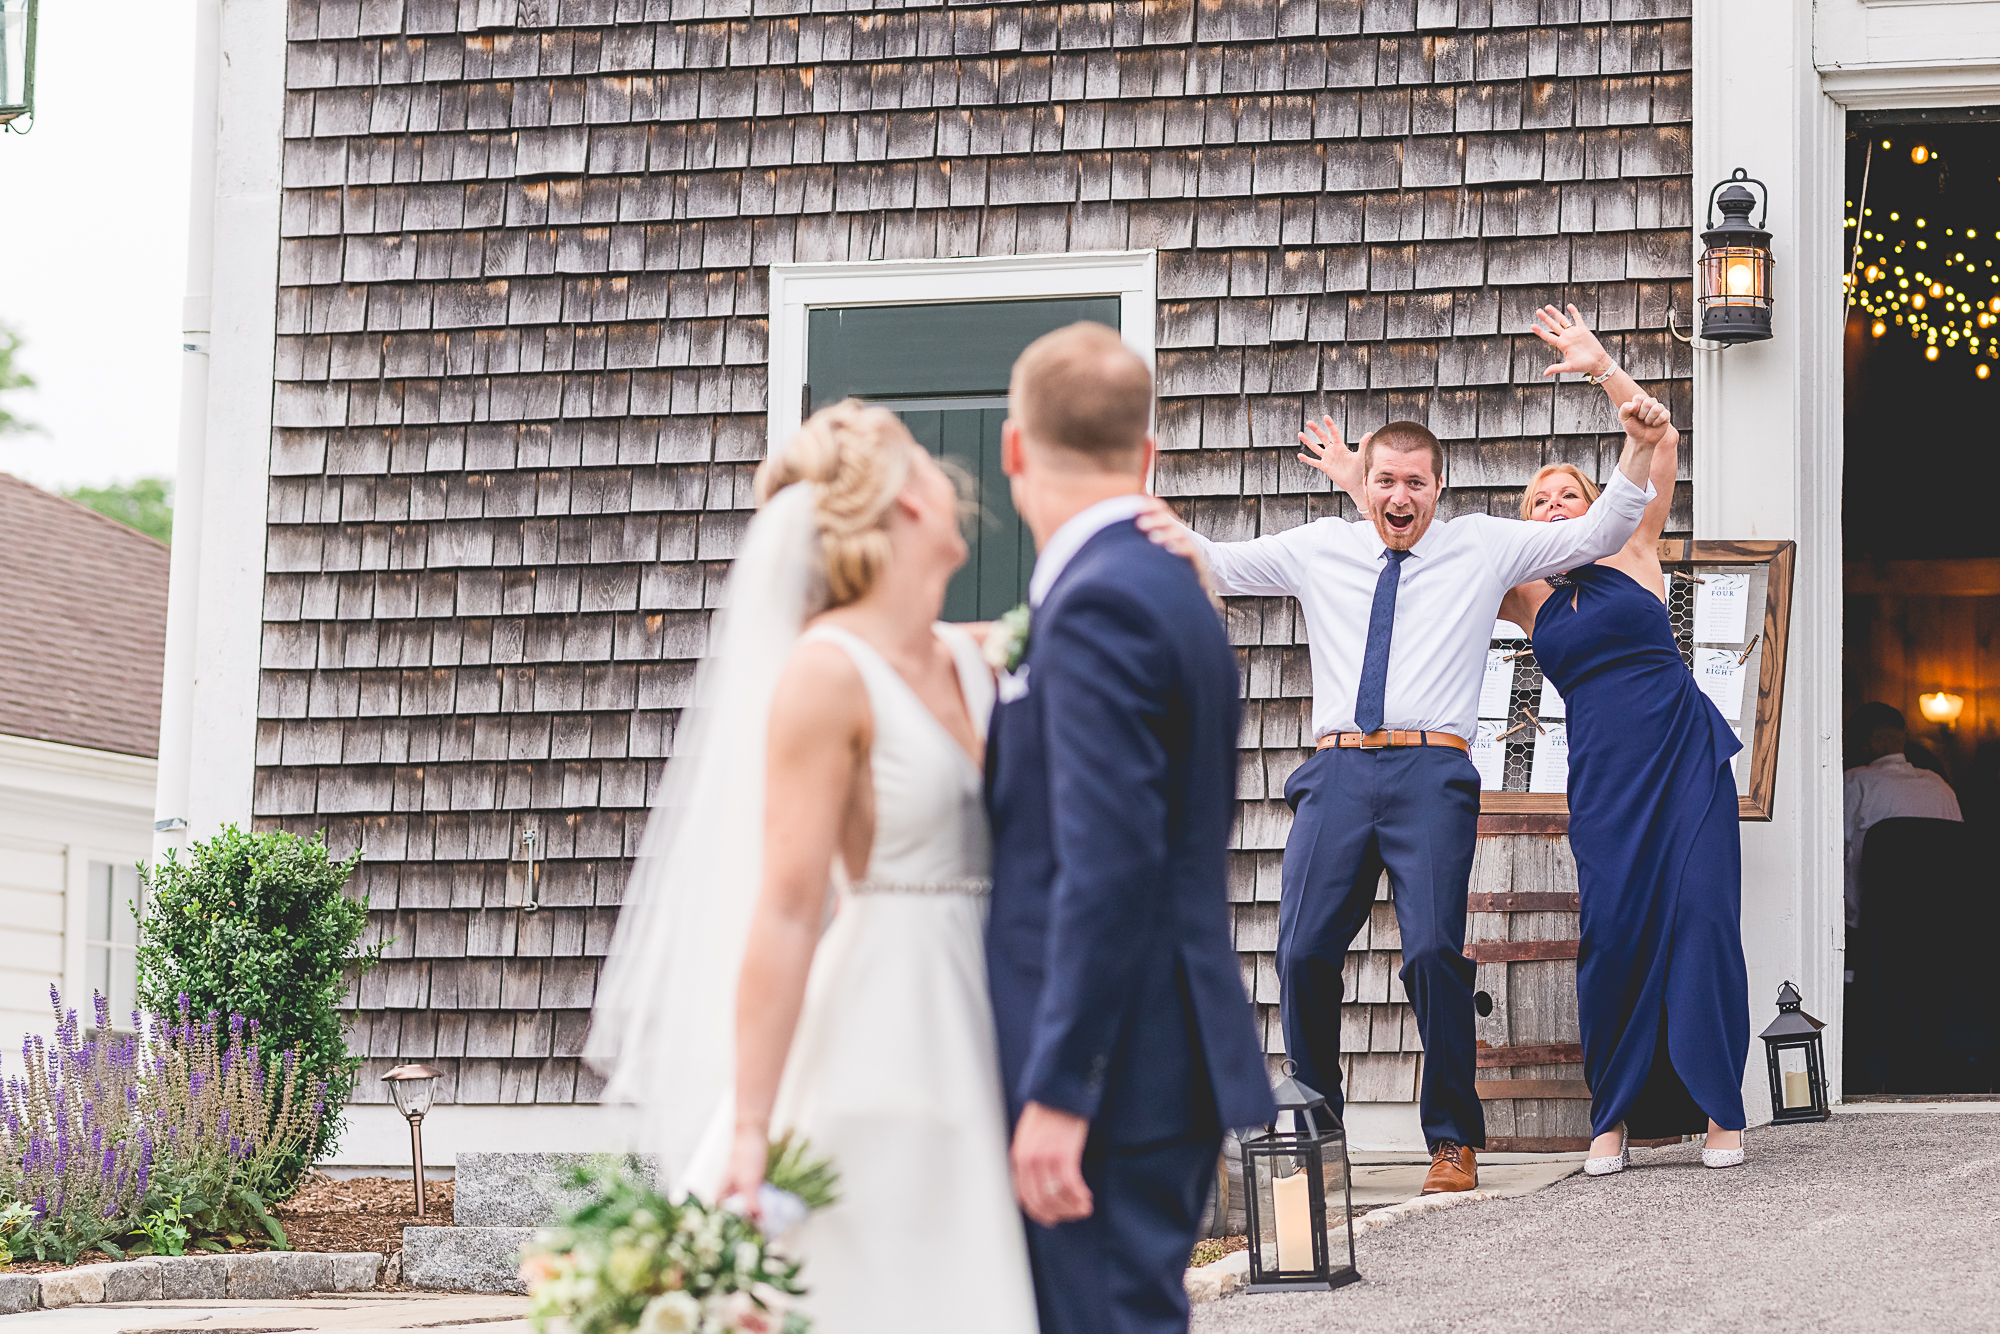 Wedding at Mt Hope Farm in Bristol RI. Bride and groom laughing as two friends cheer behind them.